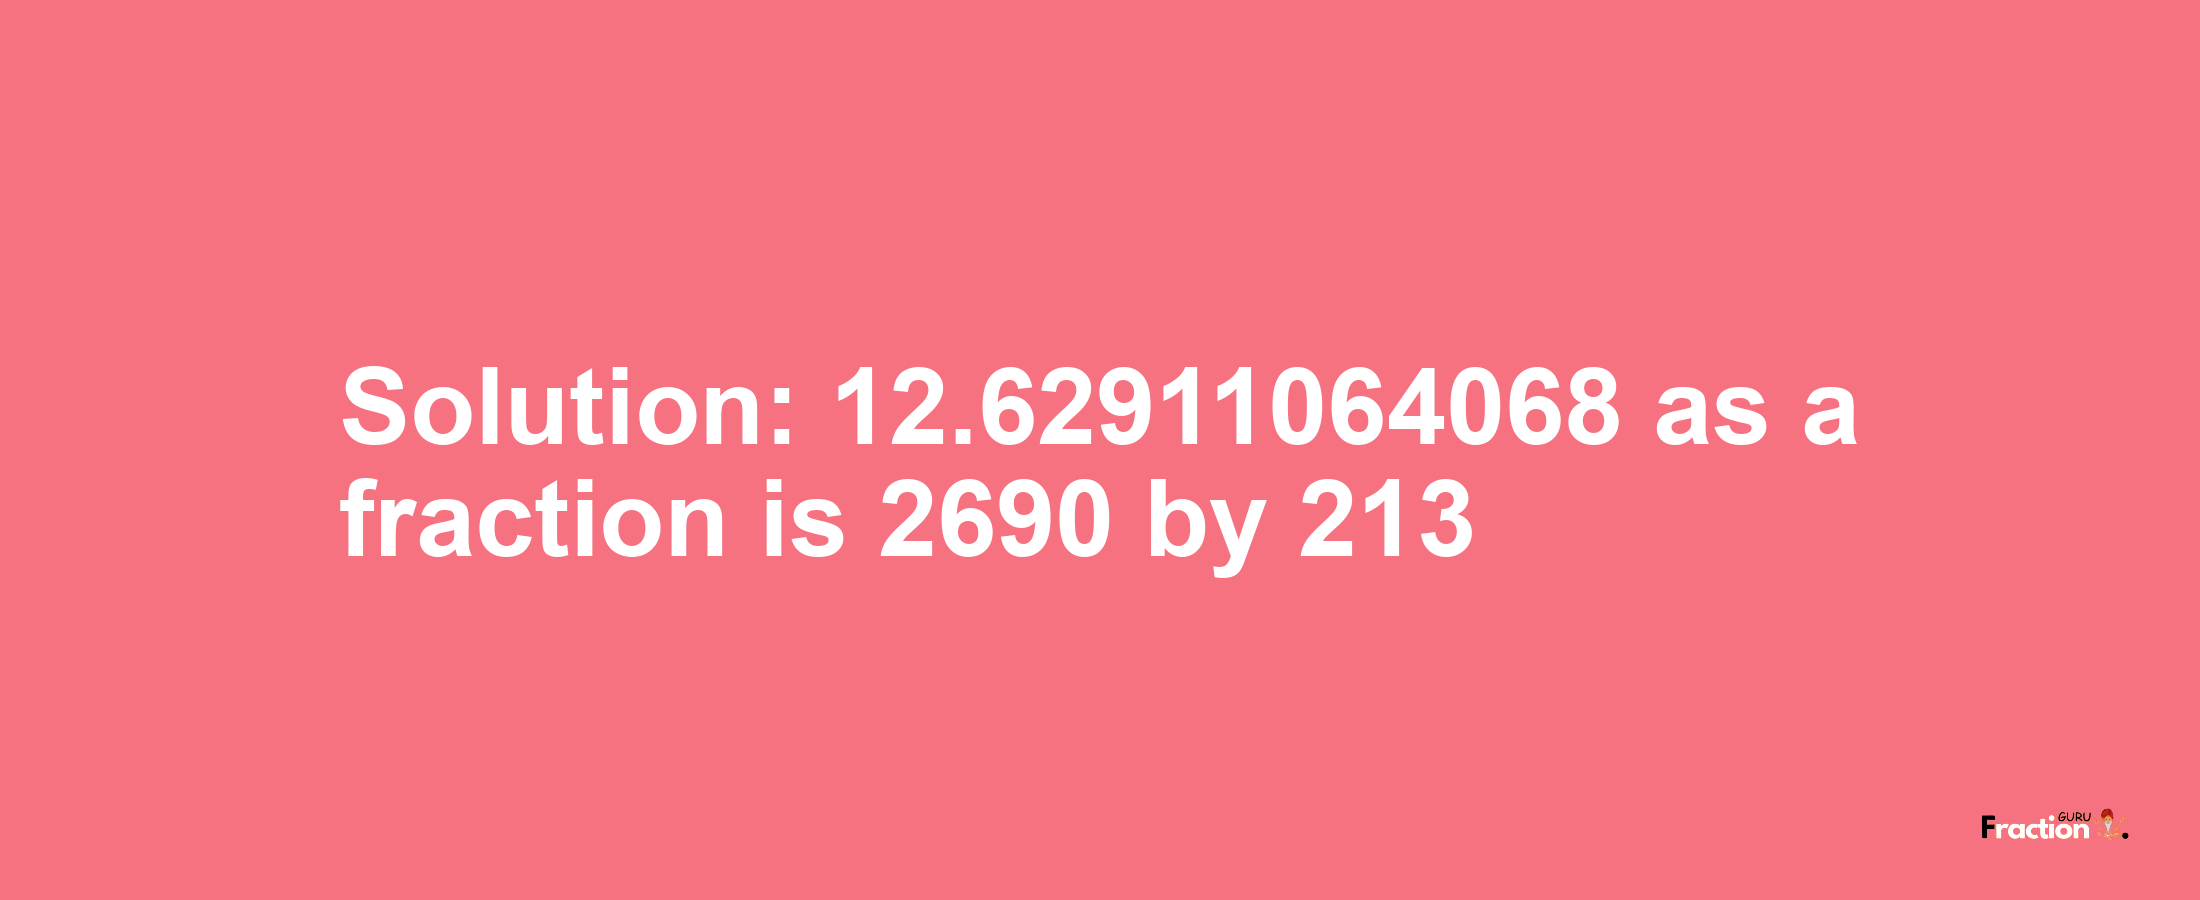 Solution:12.62911064068 as a fraction is 2690/213